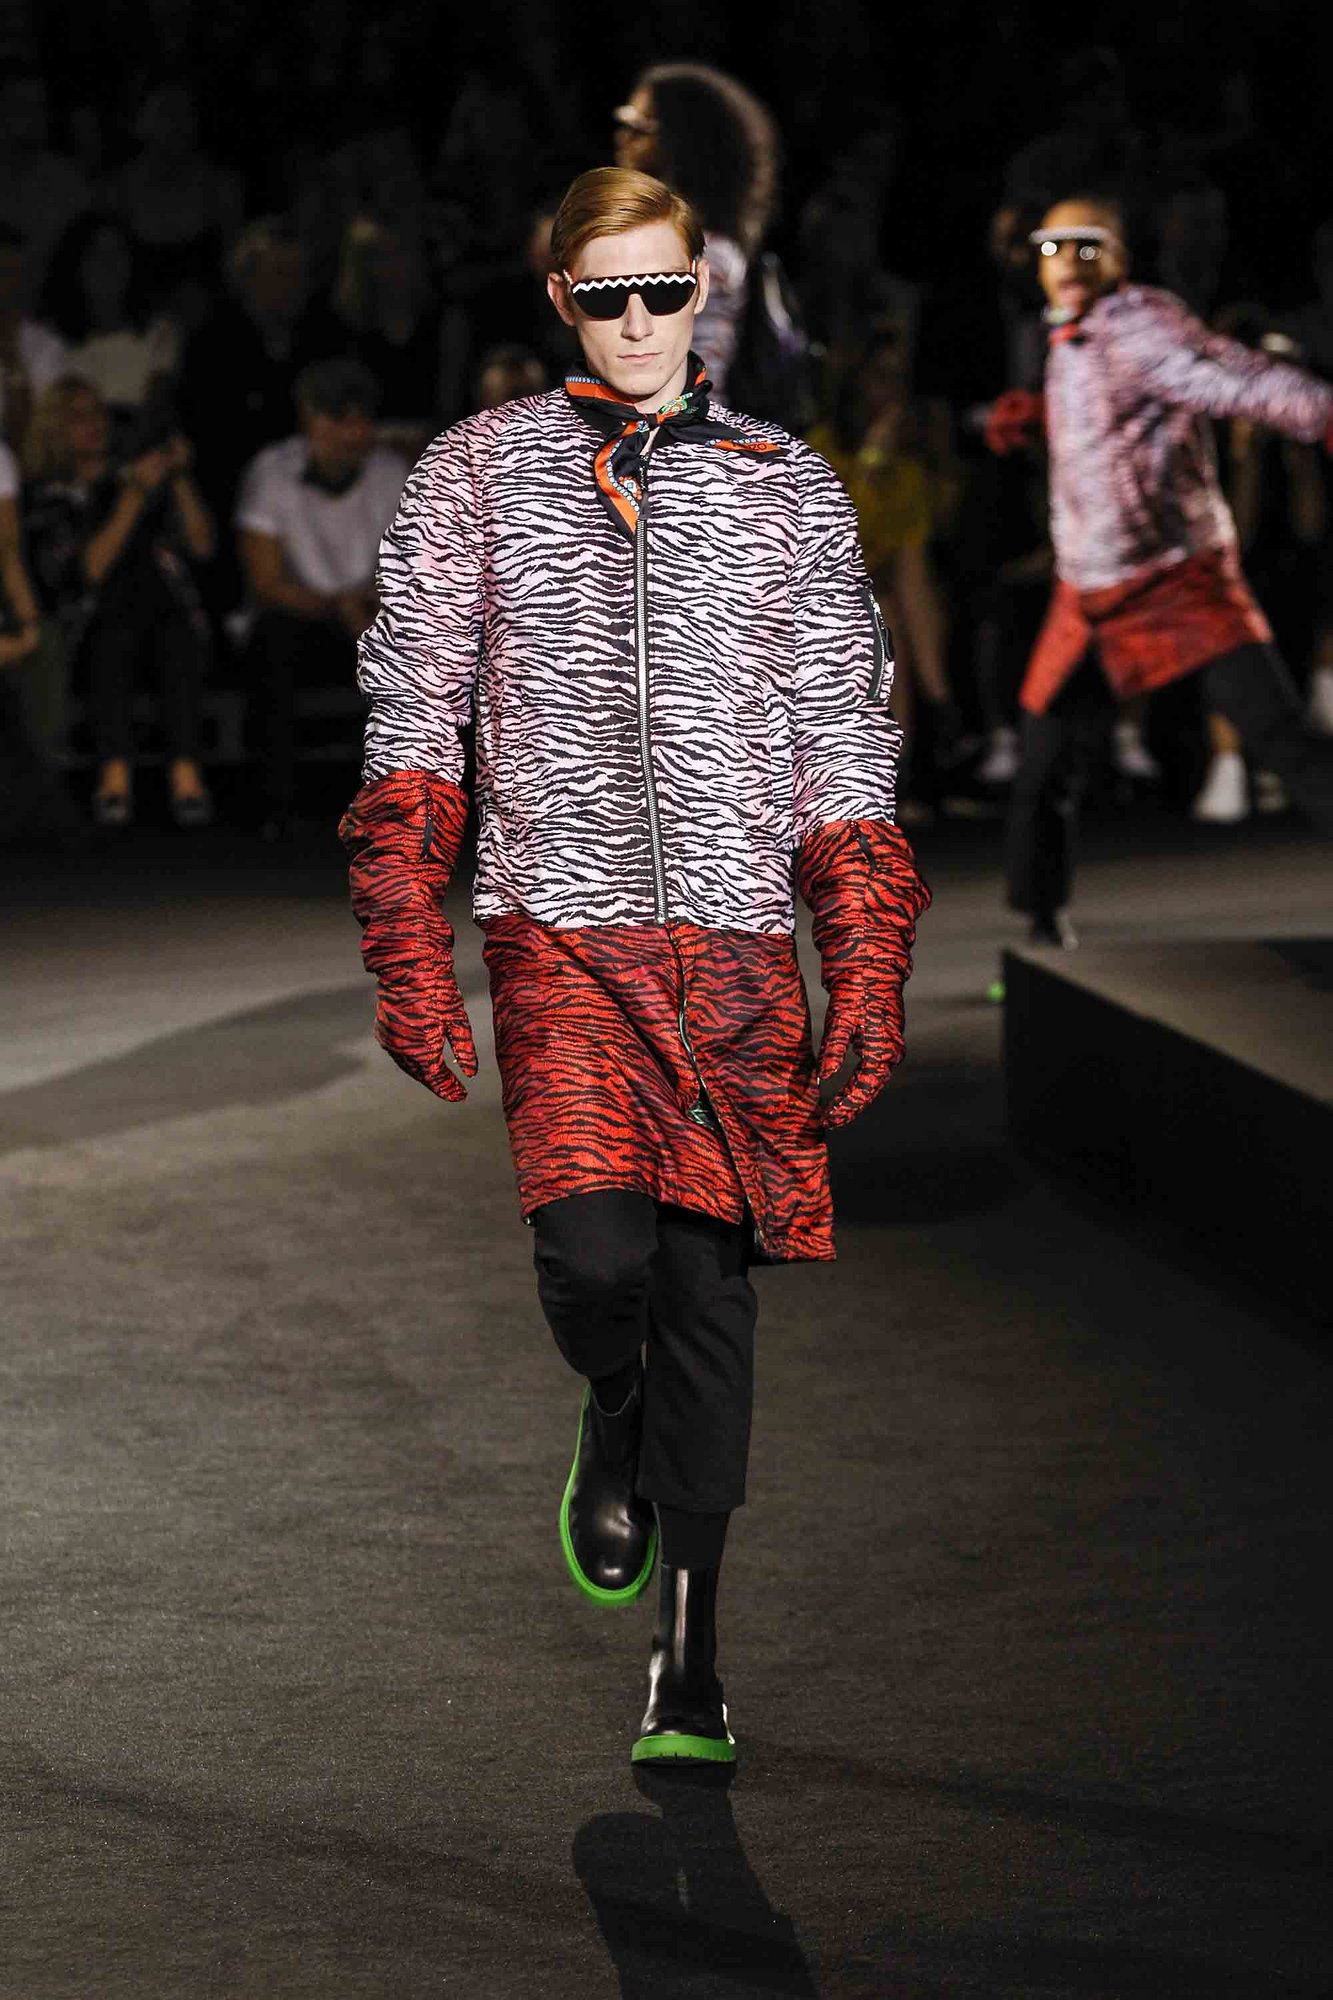 kenzo-x-h-and-m-runway-show-25